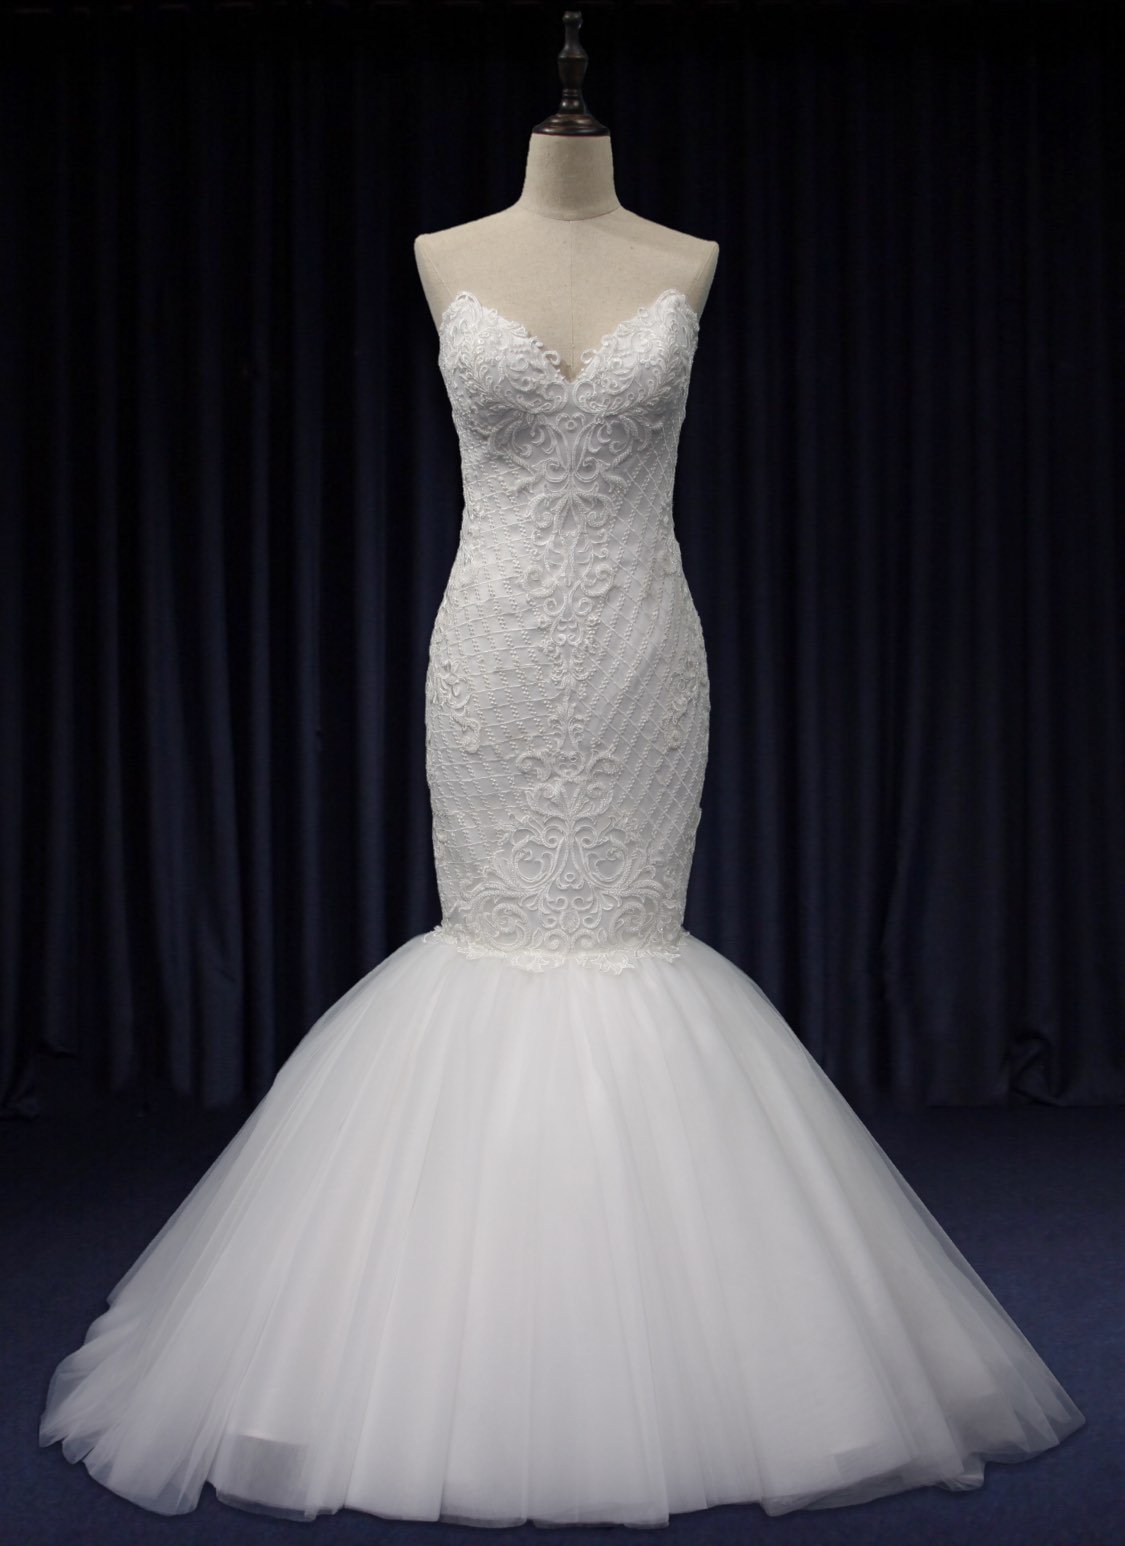 EVALYN | Strapless Lace Bodice Fishtail Wedding Gown - Wedding Dress Envious Bridal & Formal